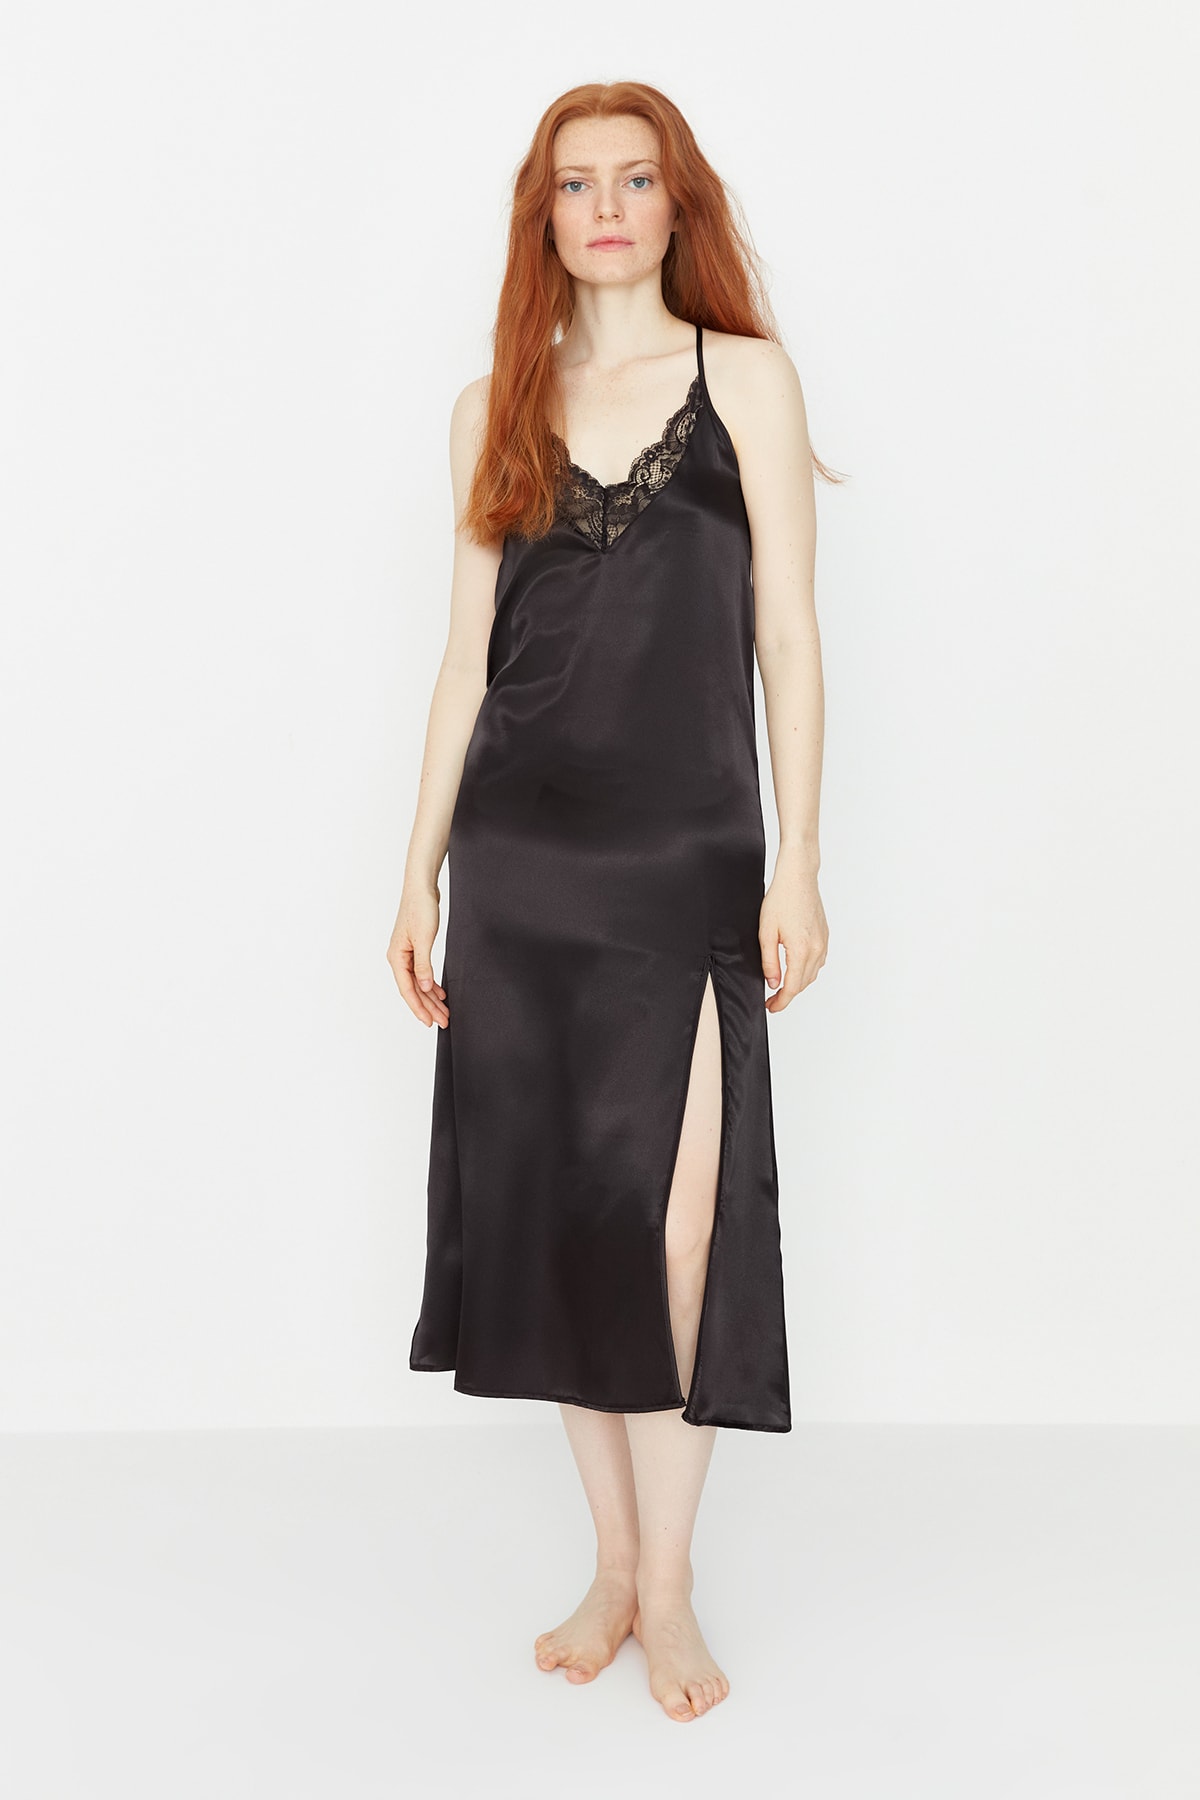 Trendyol Weave Black Satin Nightgown With Lace And Back Detail With A Slit